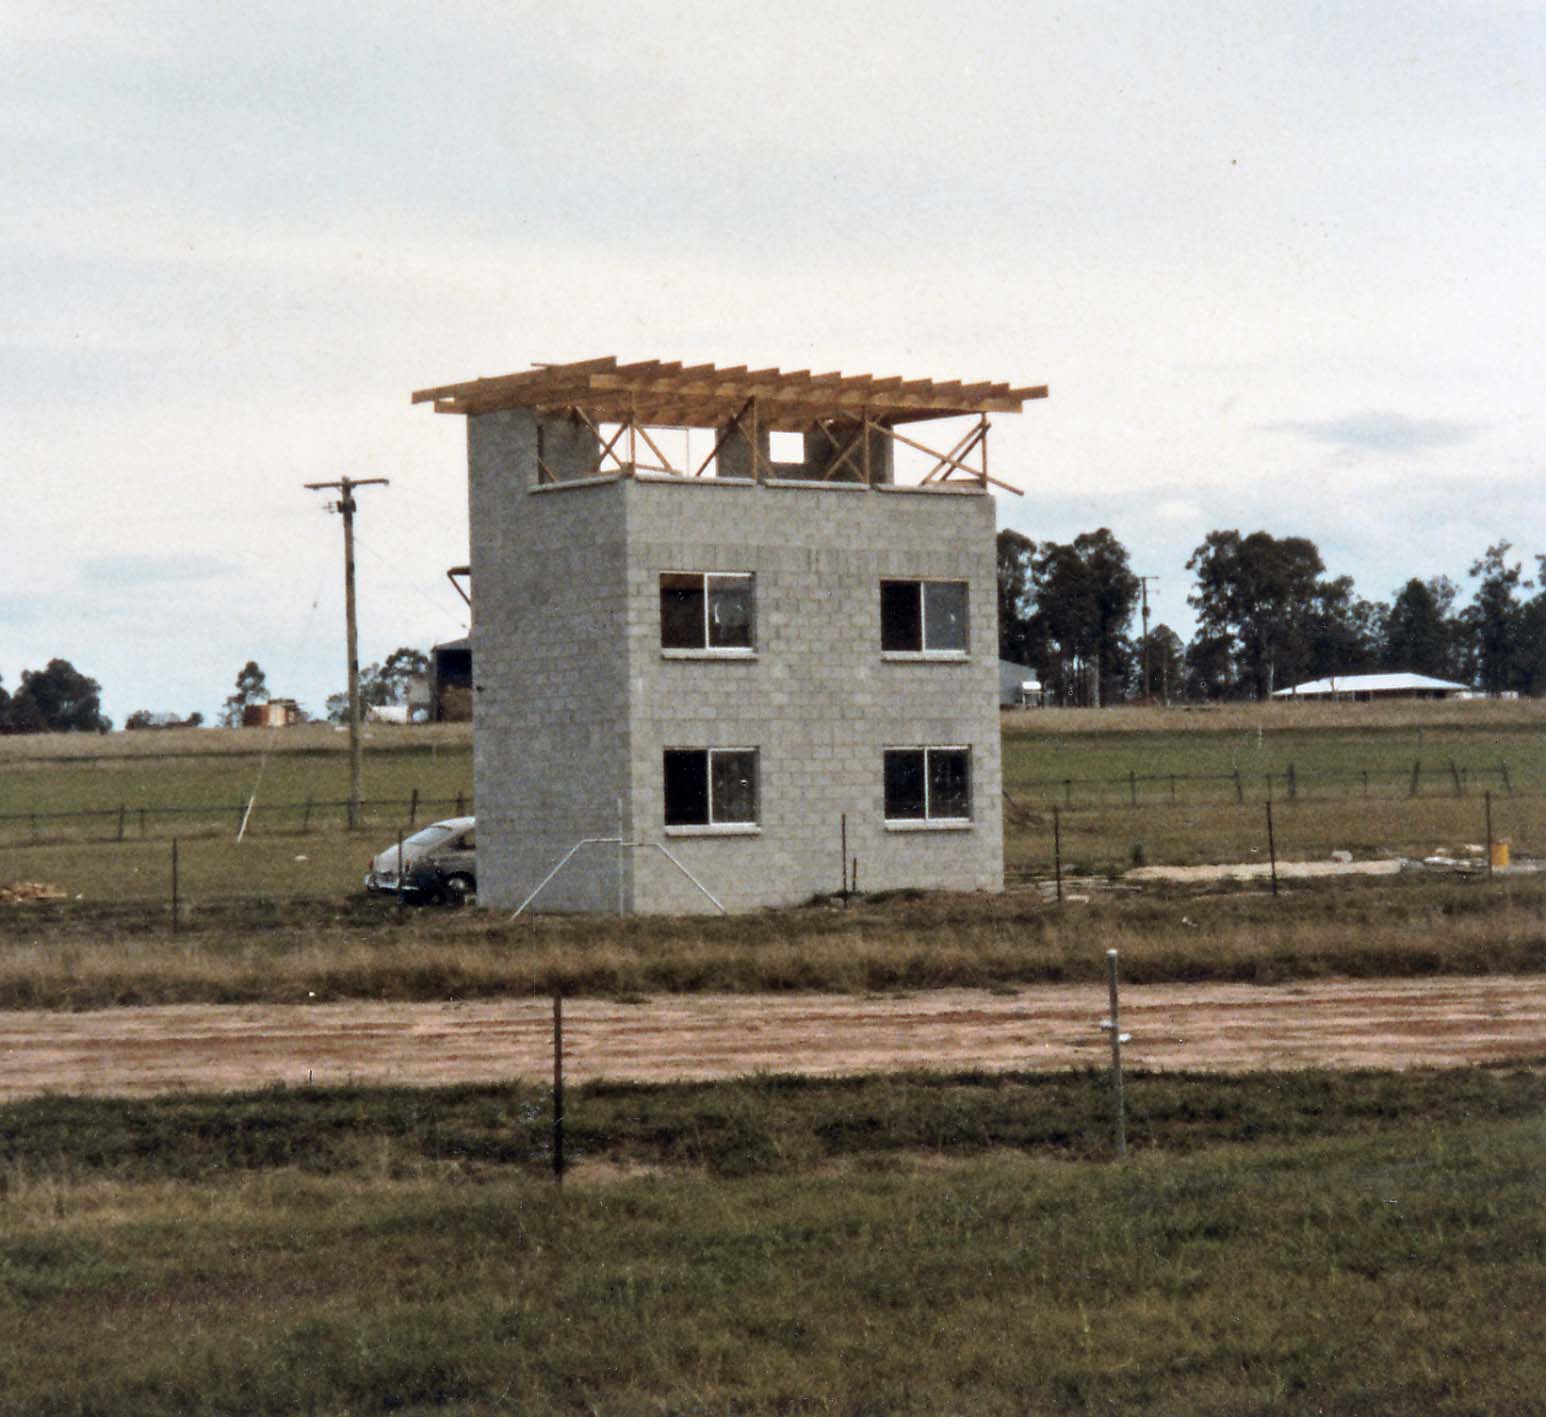 Control Tower Being Contructed